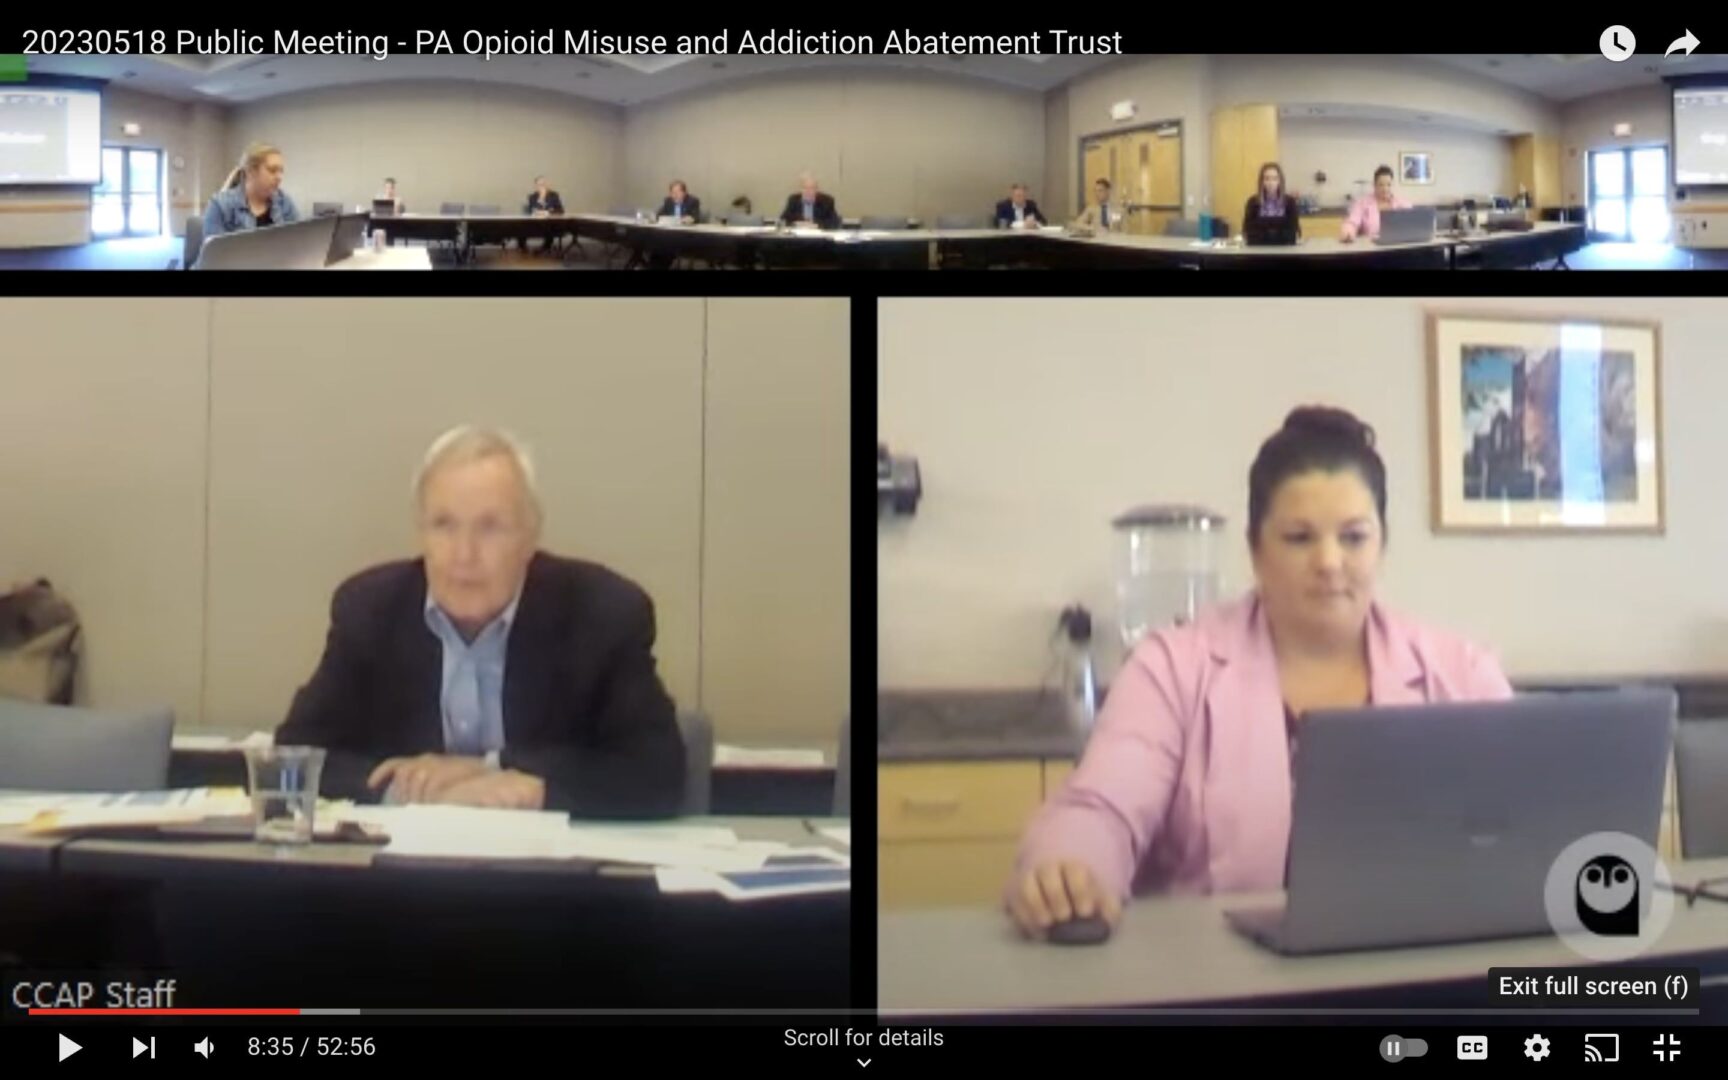 Tom VanKirk, left, is chair of the Pennsylvania Opioid Misuse and Addiction Abatement Trust. He's said the trust intends “to be as transparent as possible.” But he defended holding meetings in secret and barring the public from speaking at meetings. (Screenshot from a video of the board's May 18, 2023, meeting.)